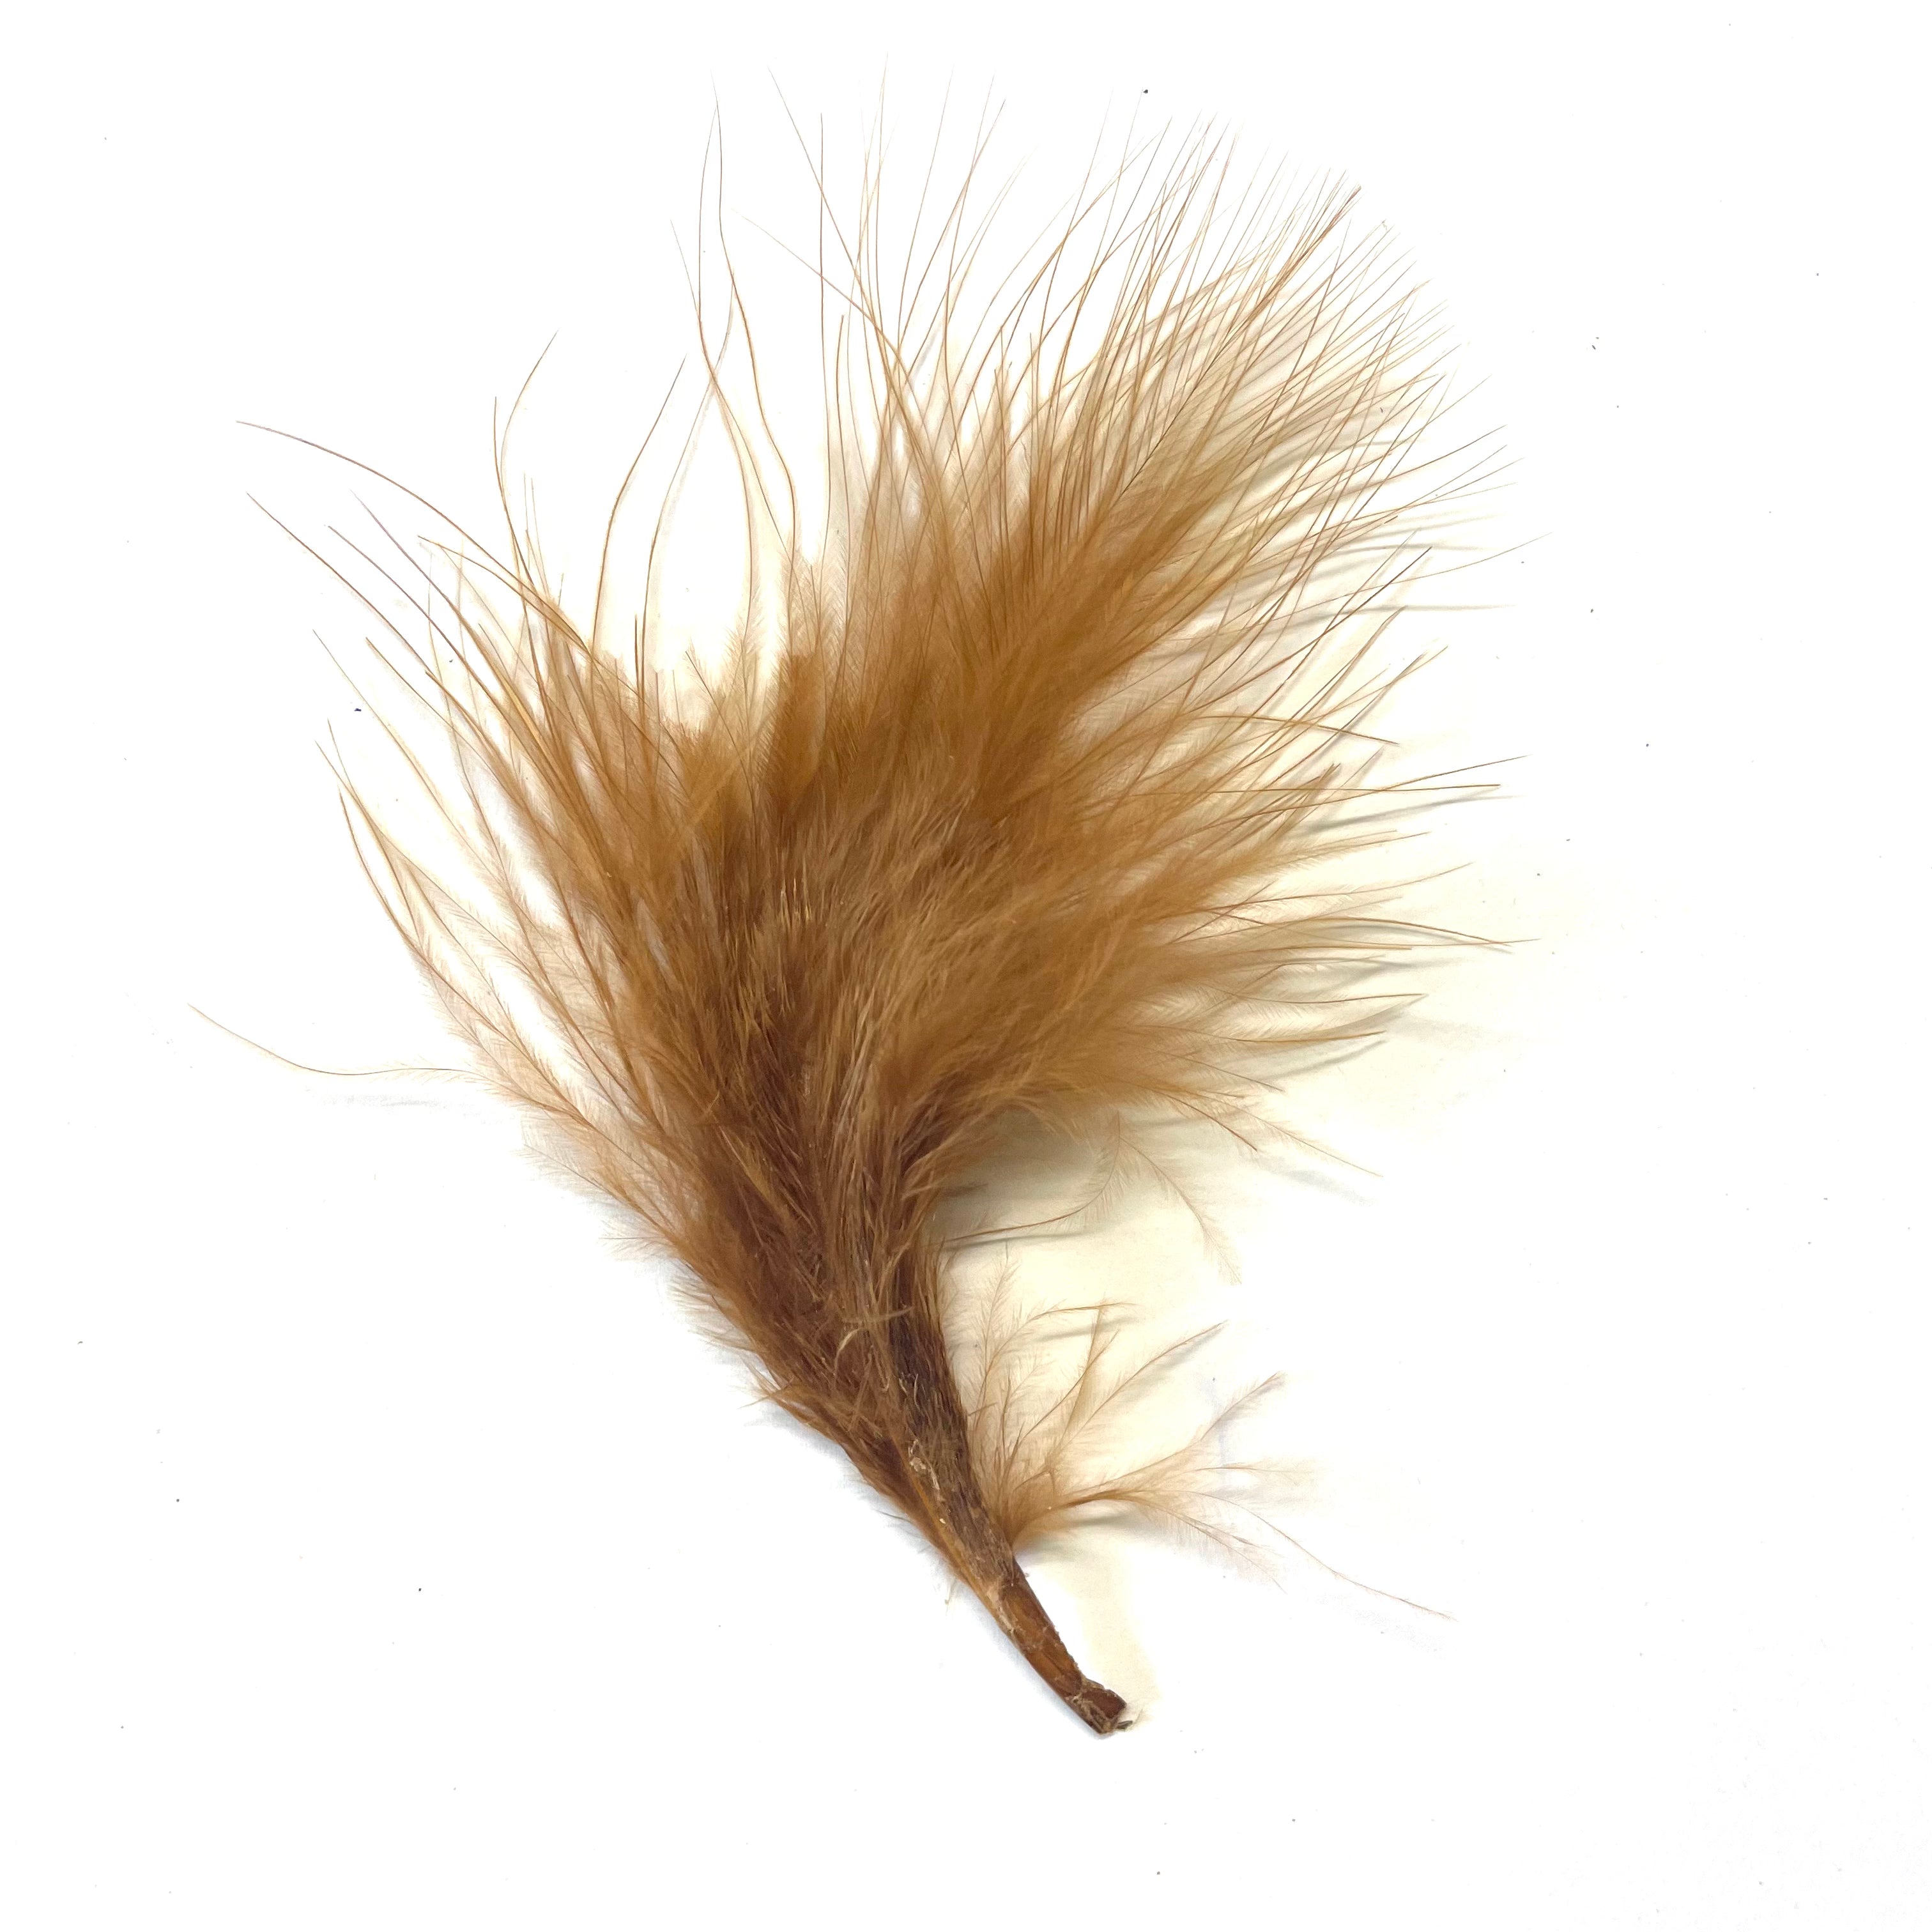 Itty Bitty Marabou Feather Plumage Pack 10 grams - Tan Brown